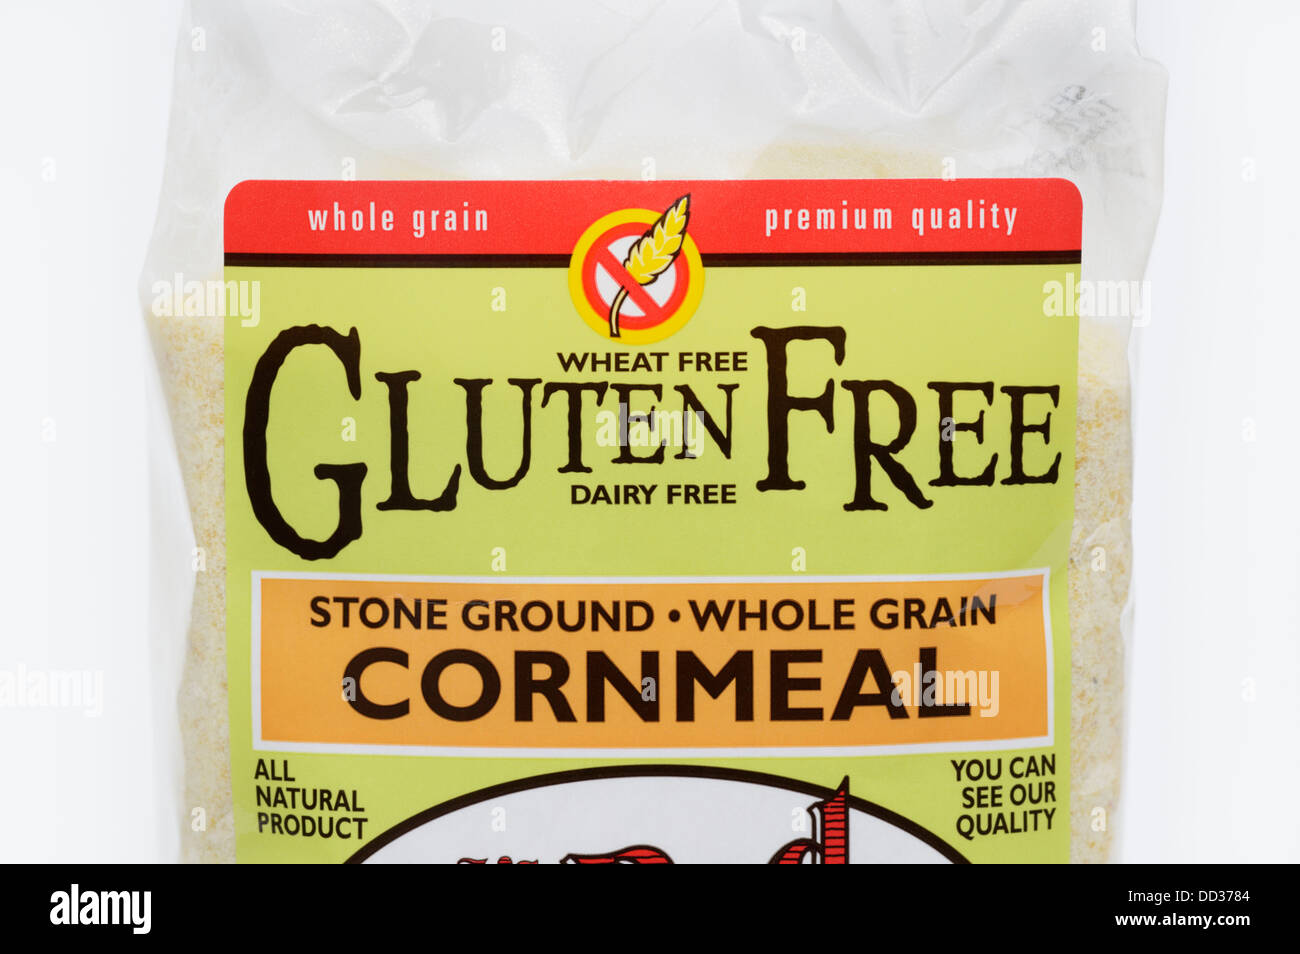 Gluten free, wheat free and dairy free labels on a cornmeal package Stock Photo